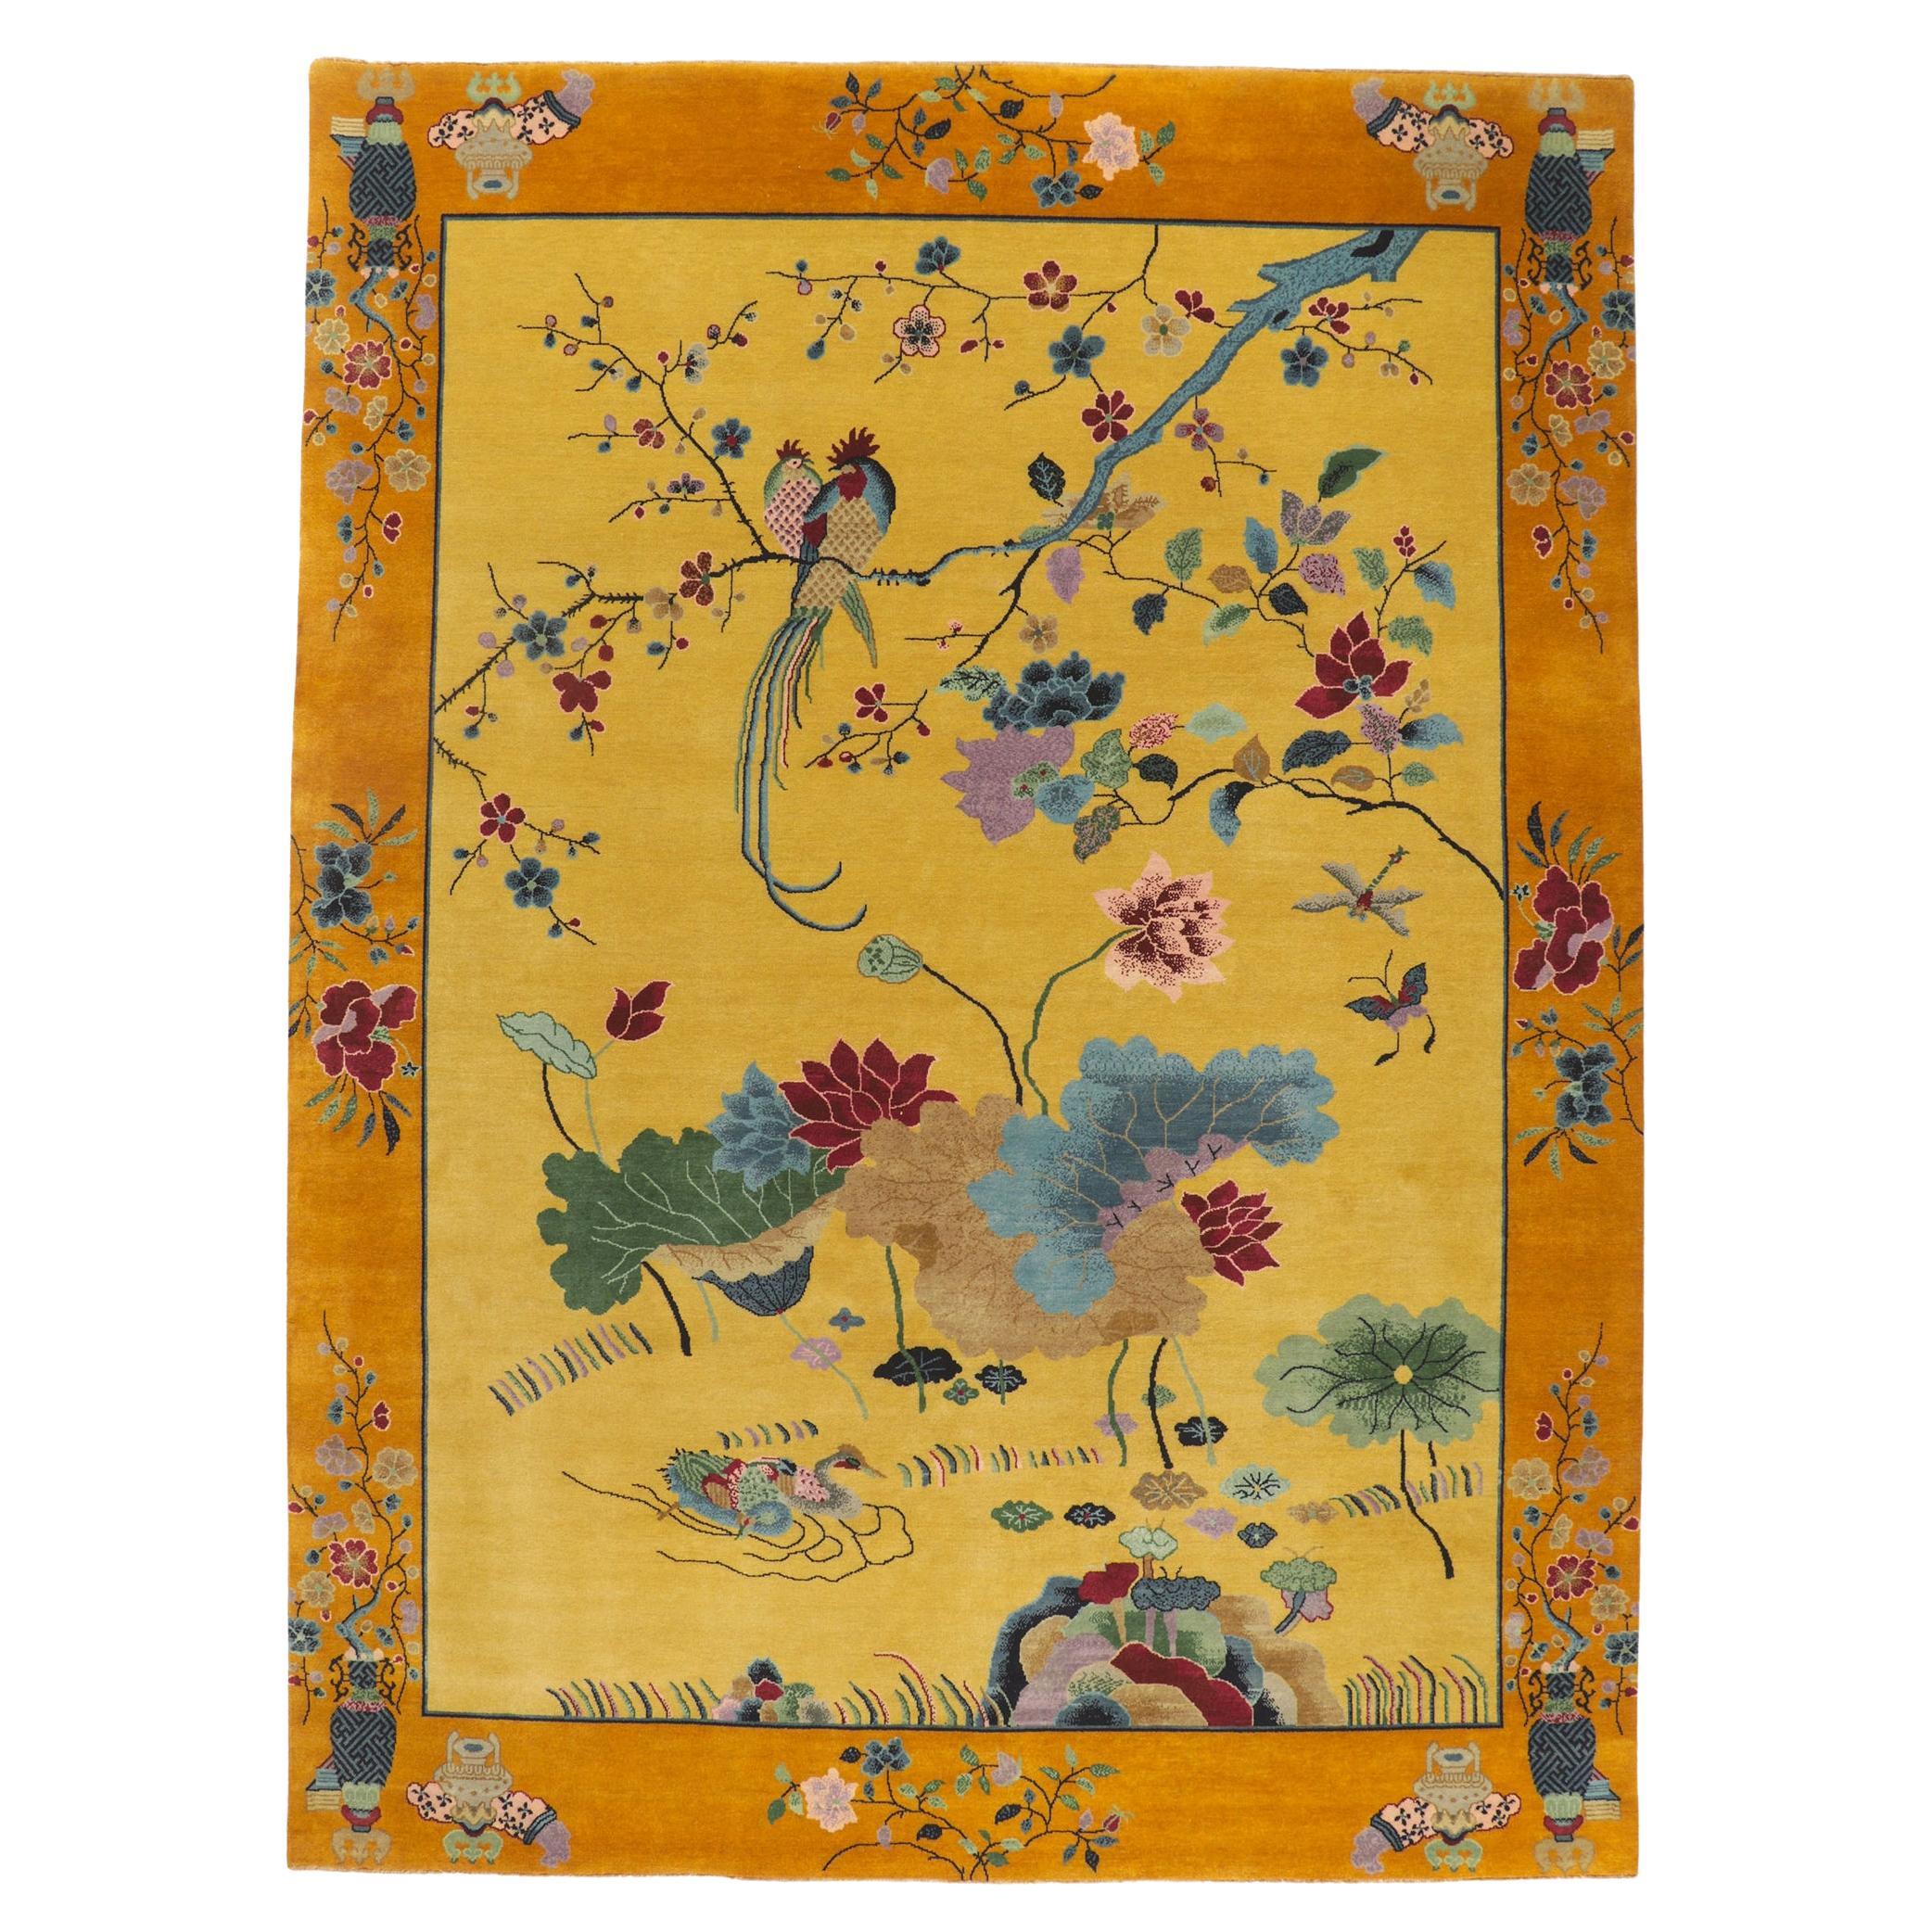 New Chinese Art Deco Rug with Maximalist Style